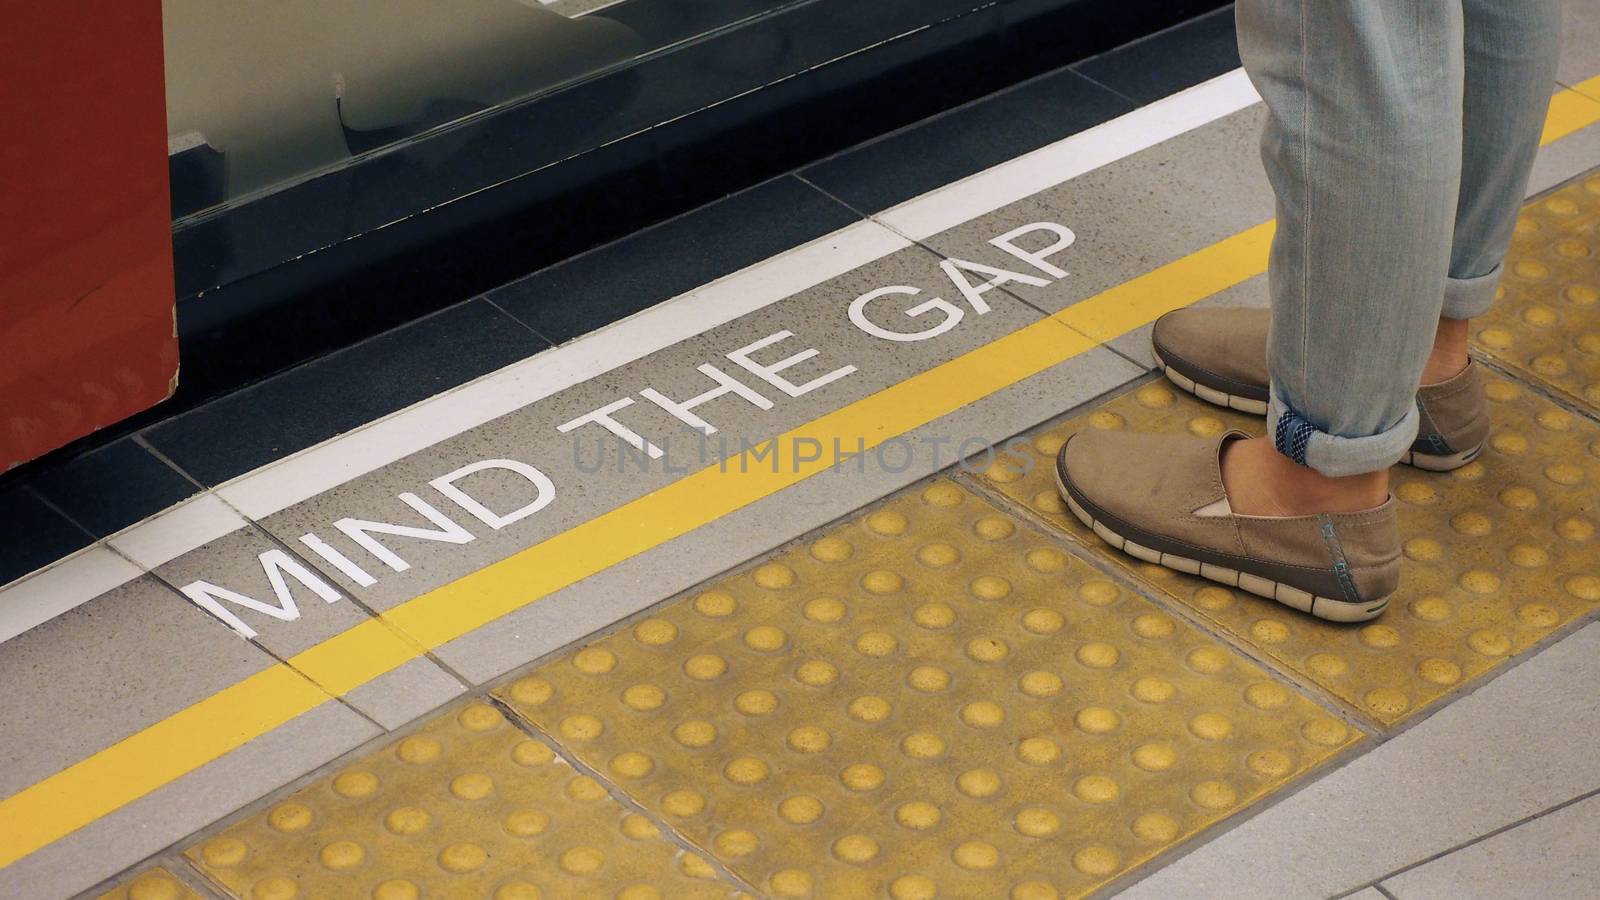 Text sign on floor between train and platform "Mind the gap" with white color and high angle view. 